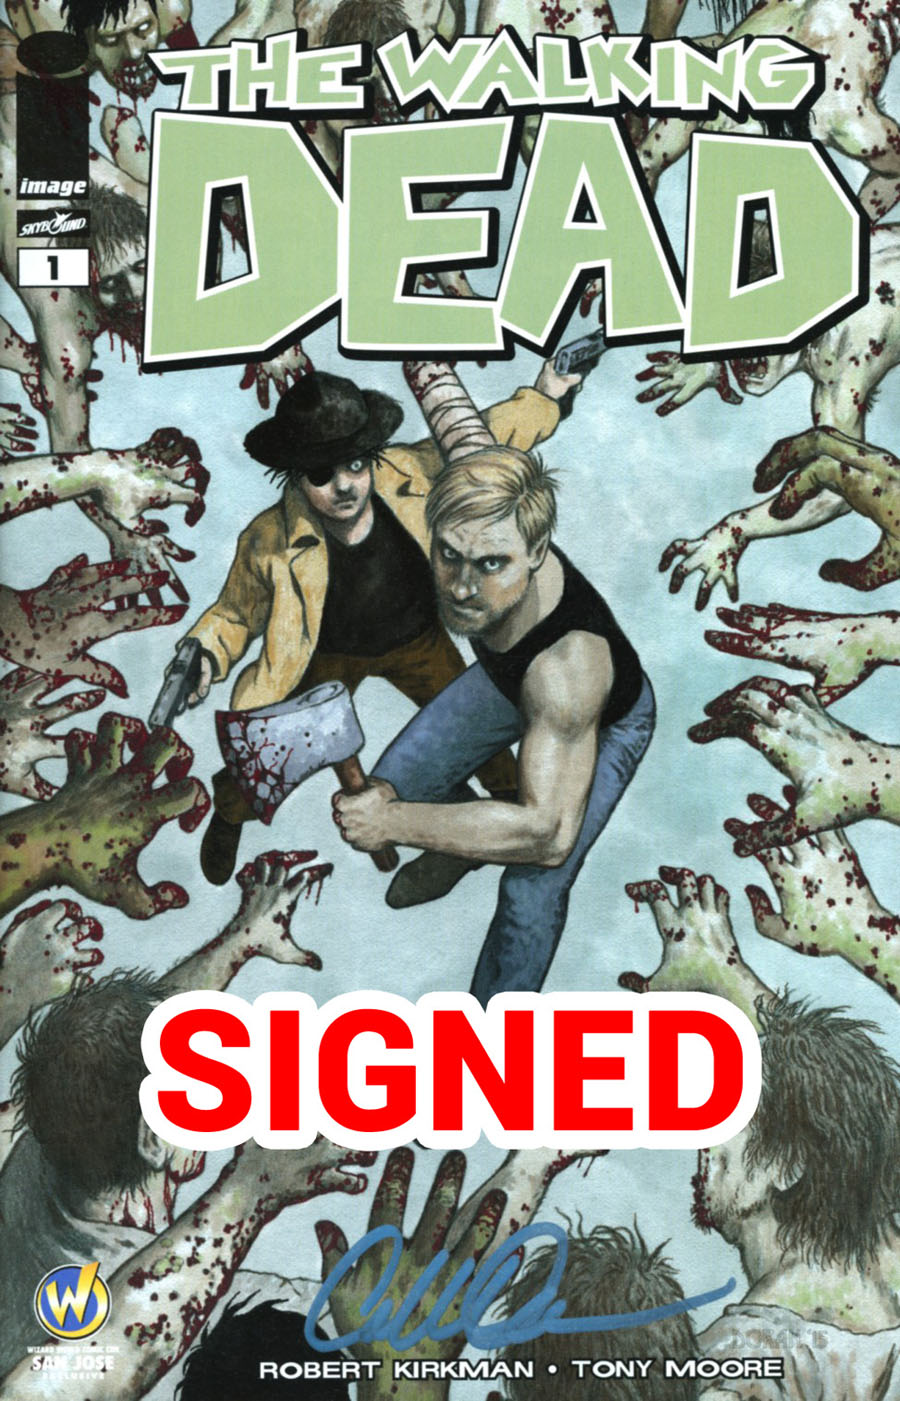 Walking Dead #1 Cover X Wizard World Comic Con San Jose Exclusive Colleen Doran Color Variant Cover Signed By Colleen Doran